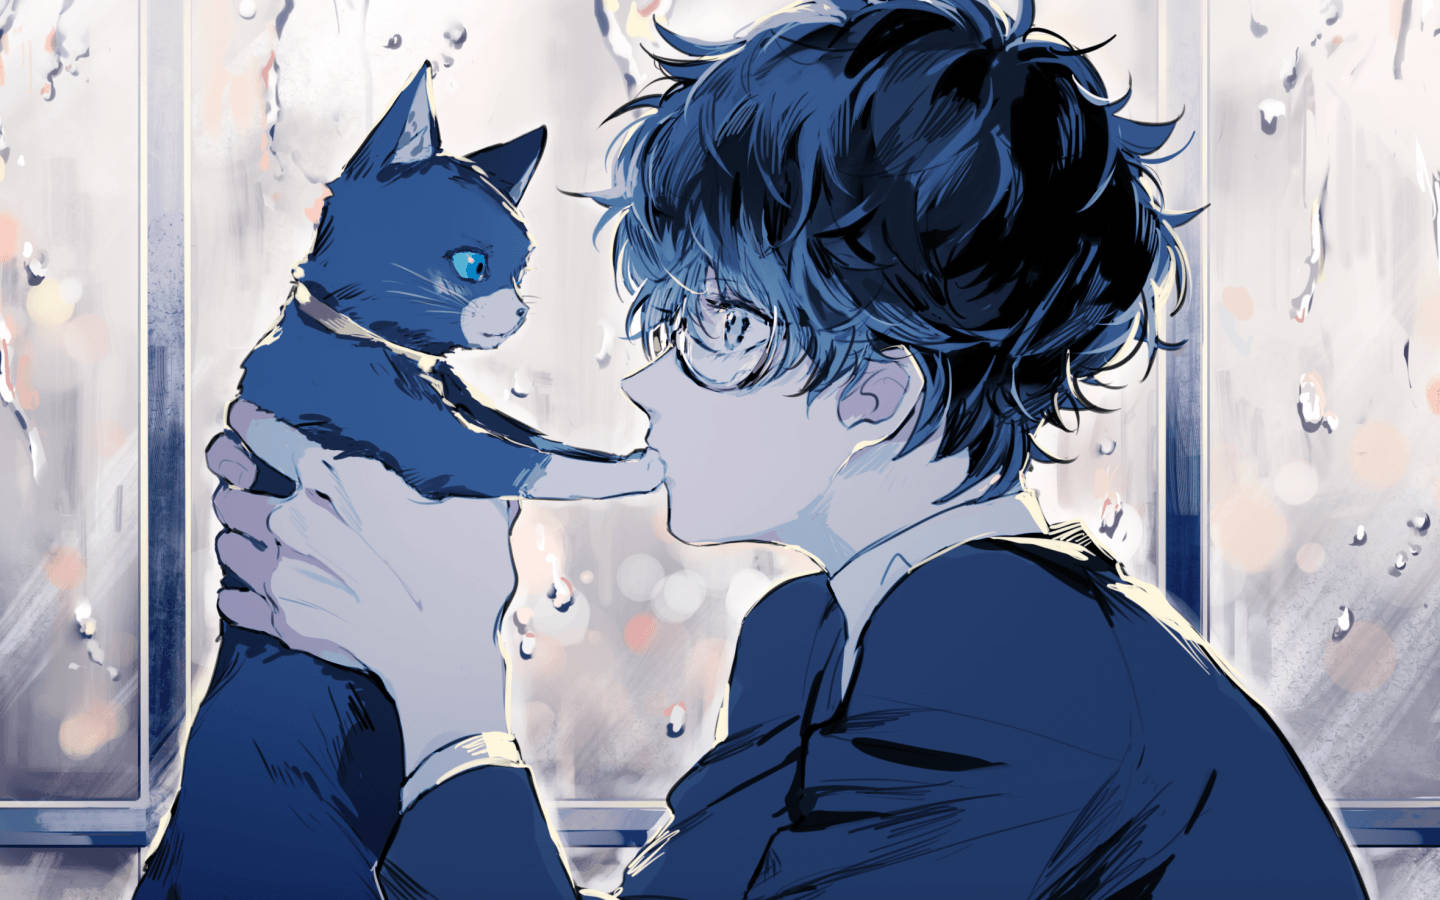 Download Cute Anime Guy And Blue Cat Wallpaper